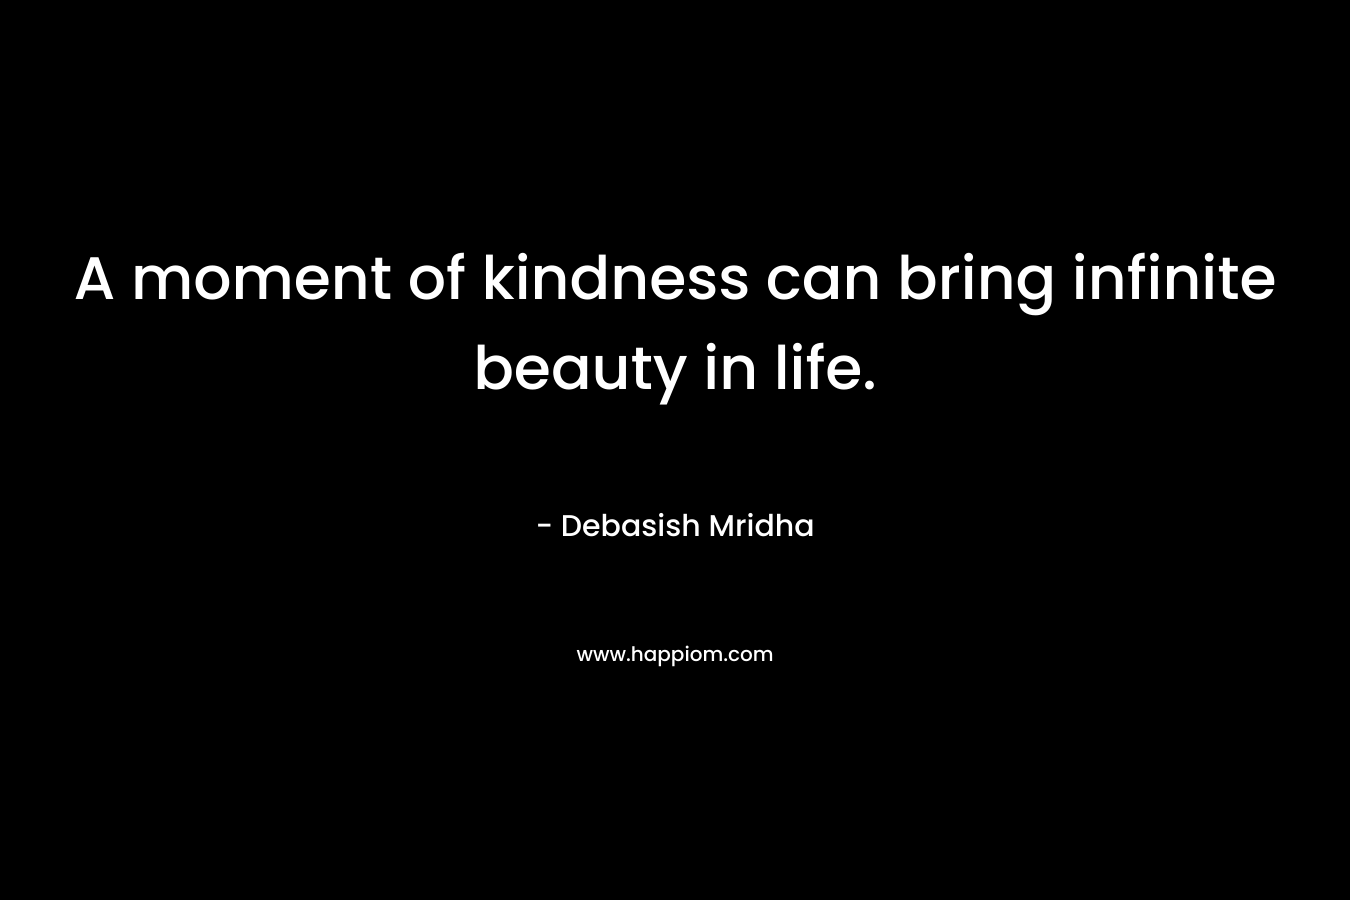 A moment of kindness can bring infinite beauty in life.